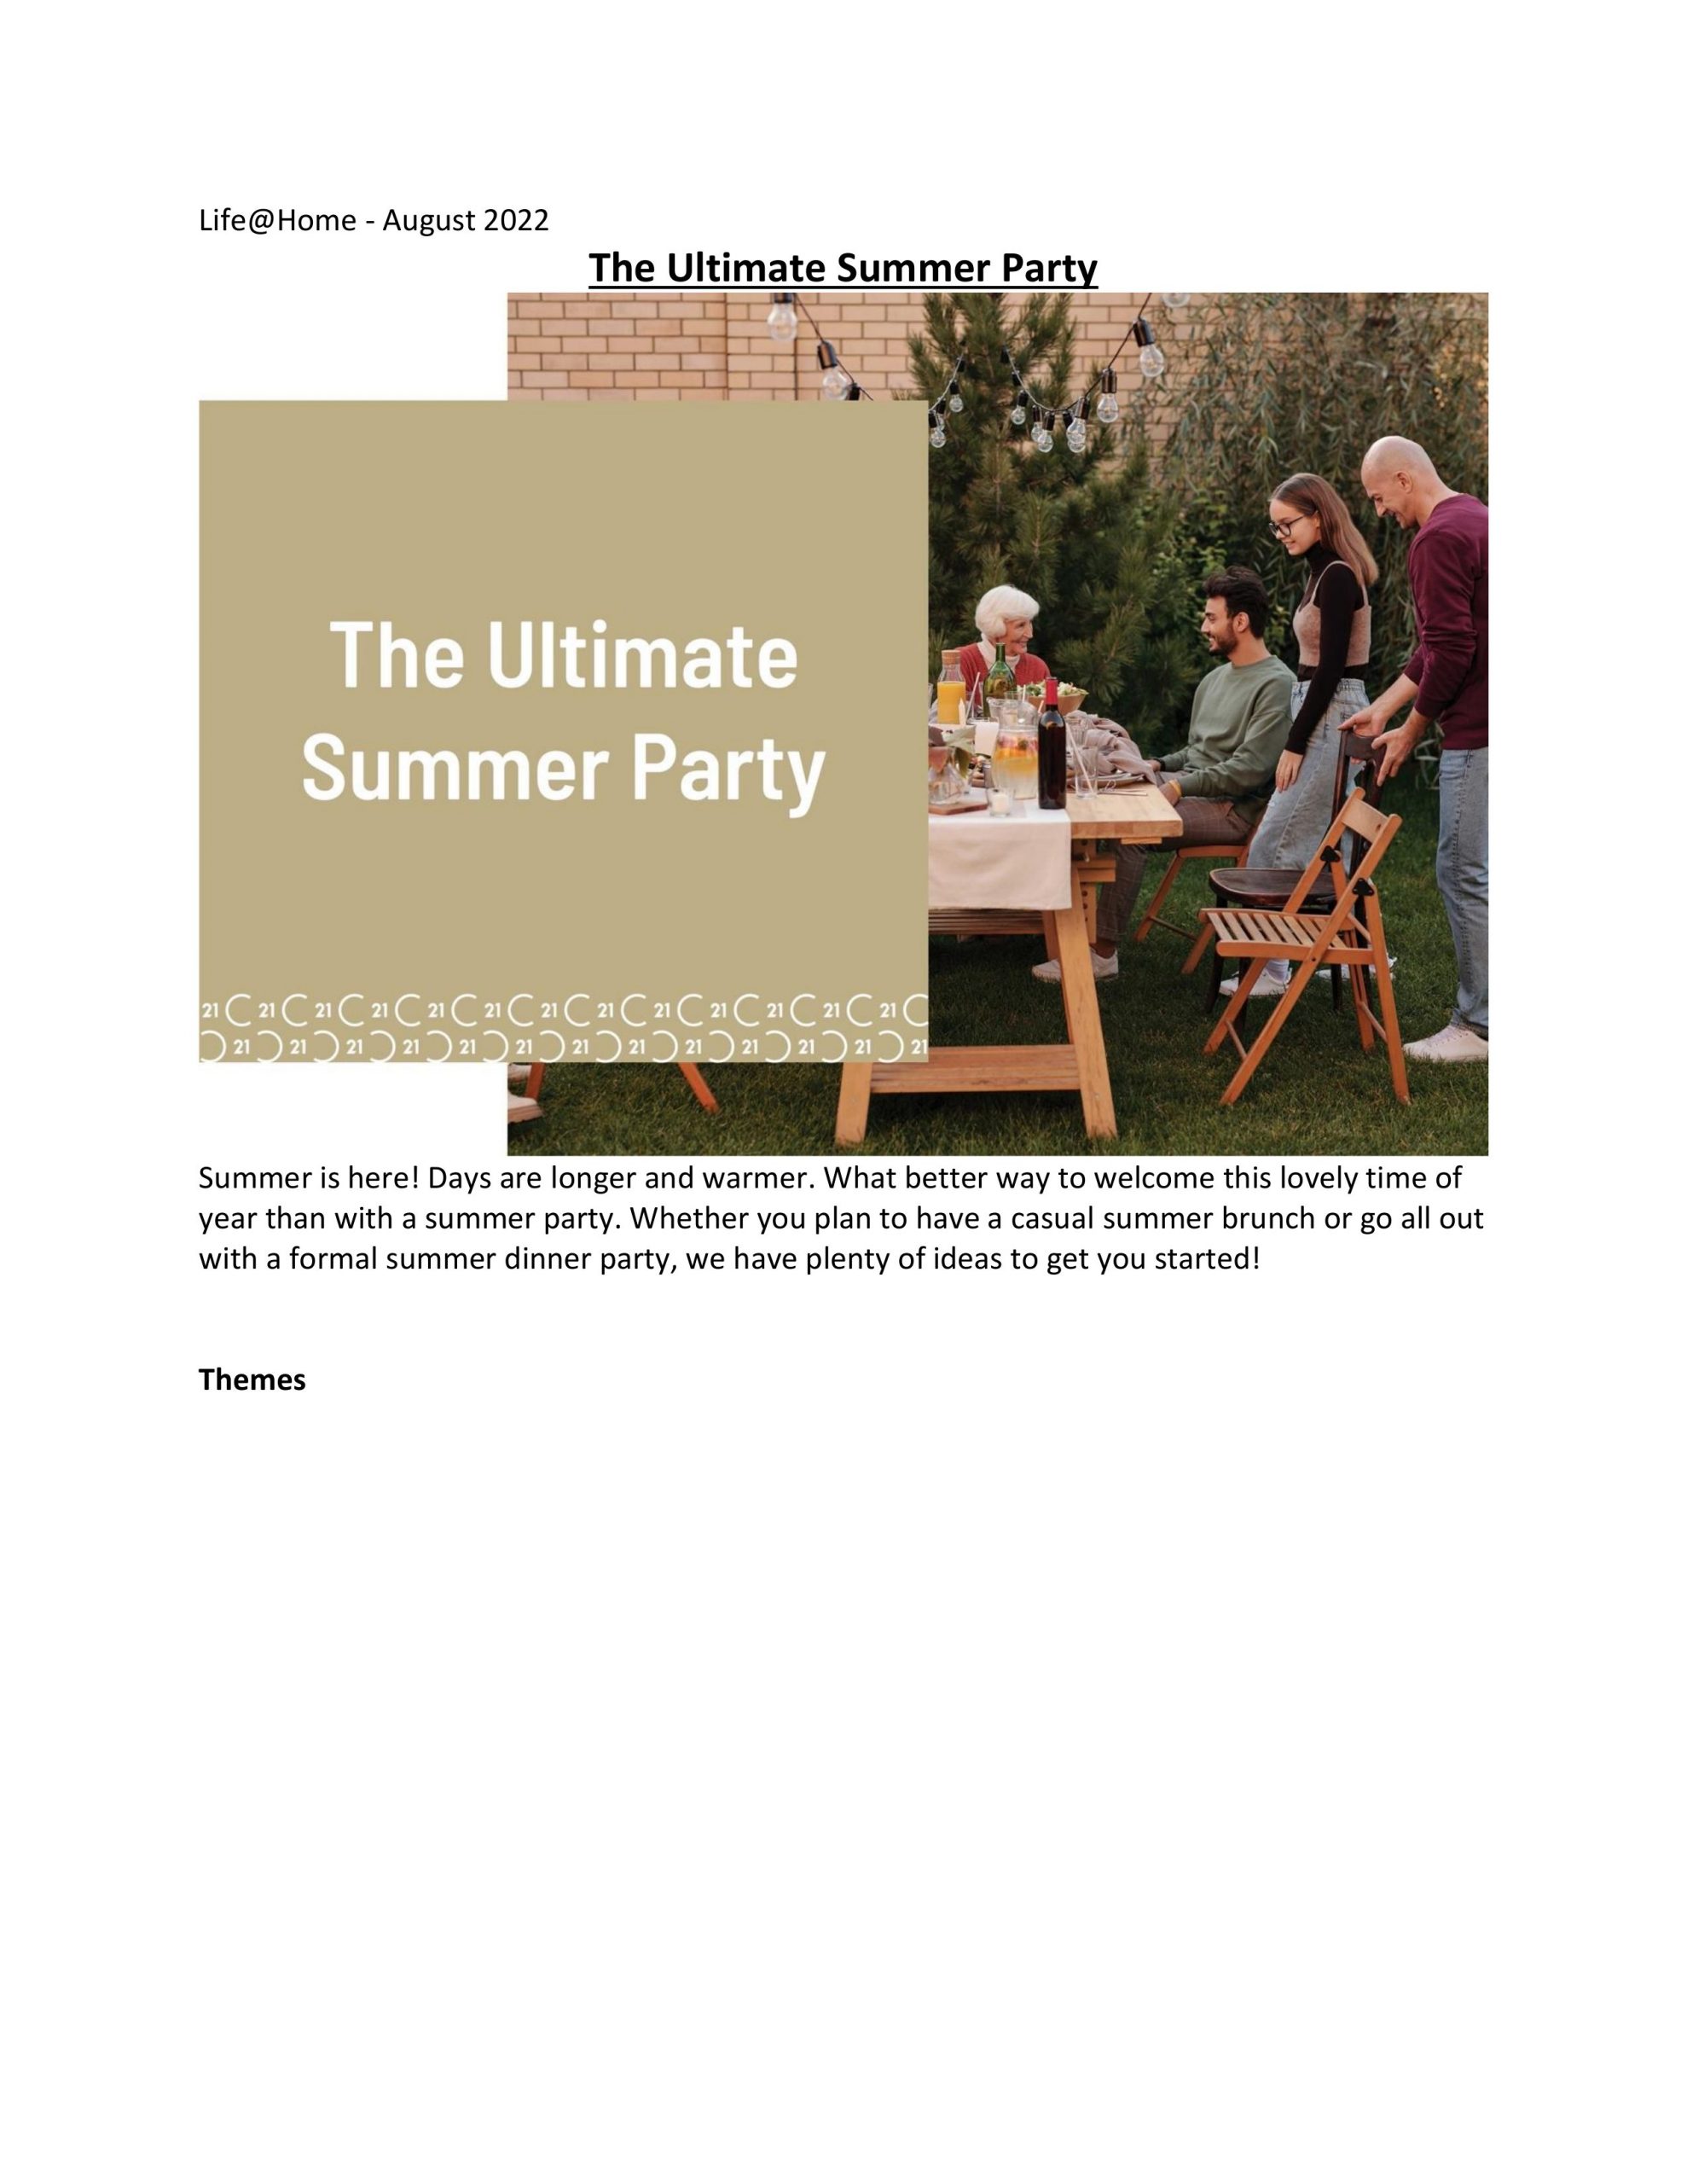 The Ultimate Summer Party is a cover page for the Life@home Newsletter with August edition. Family sitting together at a picnic table have lunch. 